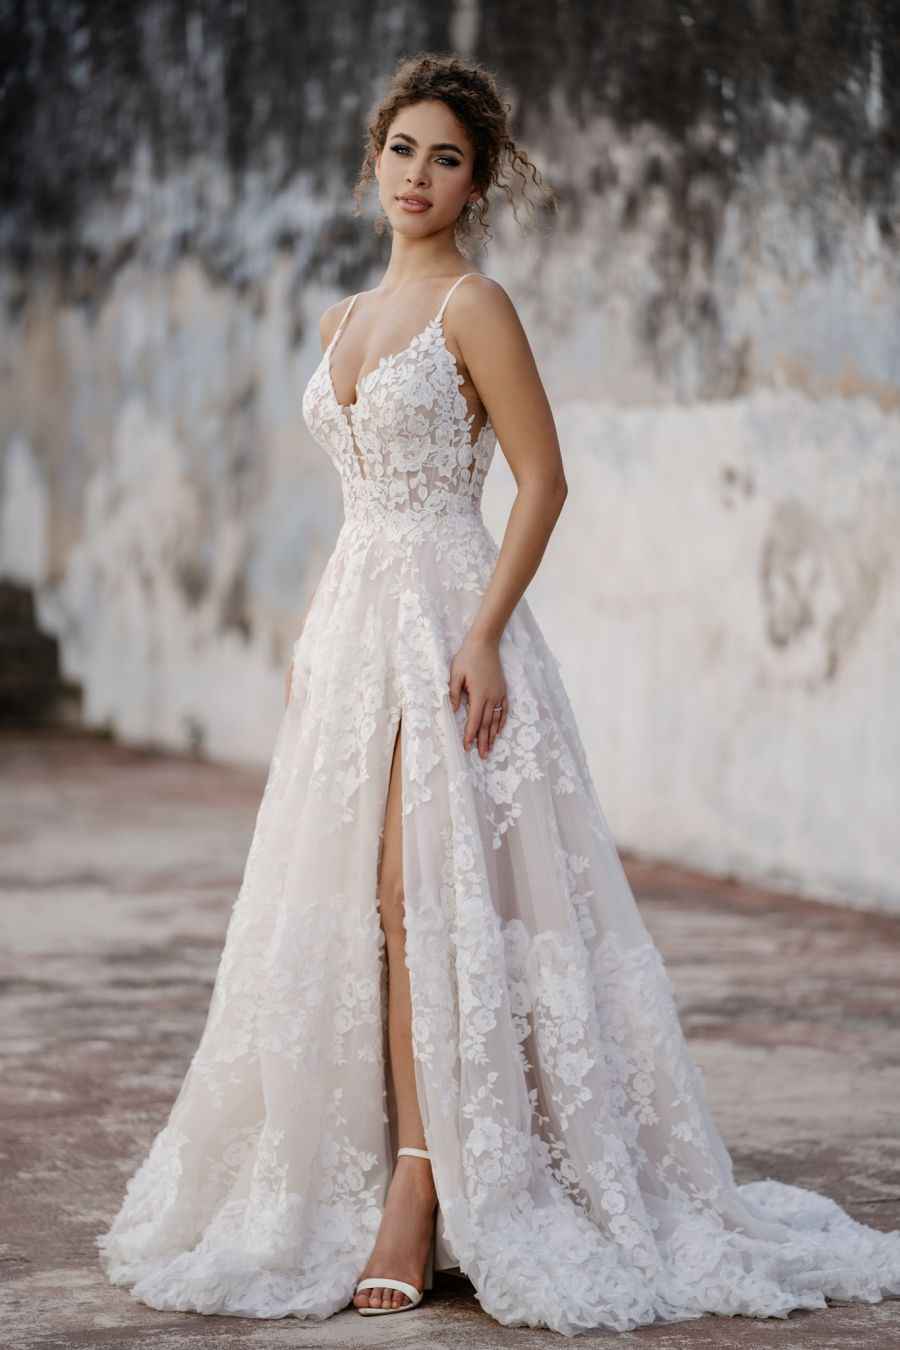 Floral Lace Wedding Dress / Lace Wedding Dress With Sequins / Bohemian Fine  Straps Wedding Dress / Handmade Wedding Dress With Nude Lining -  Canada